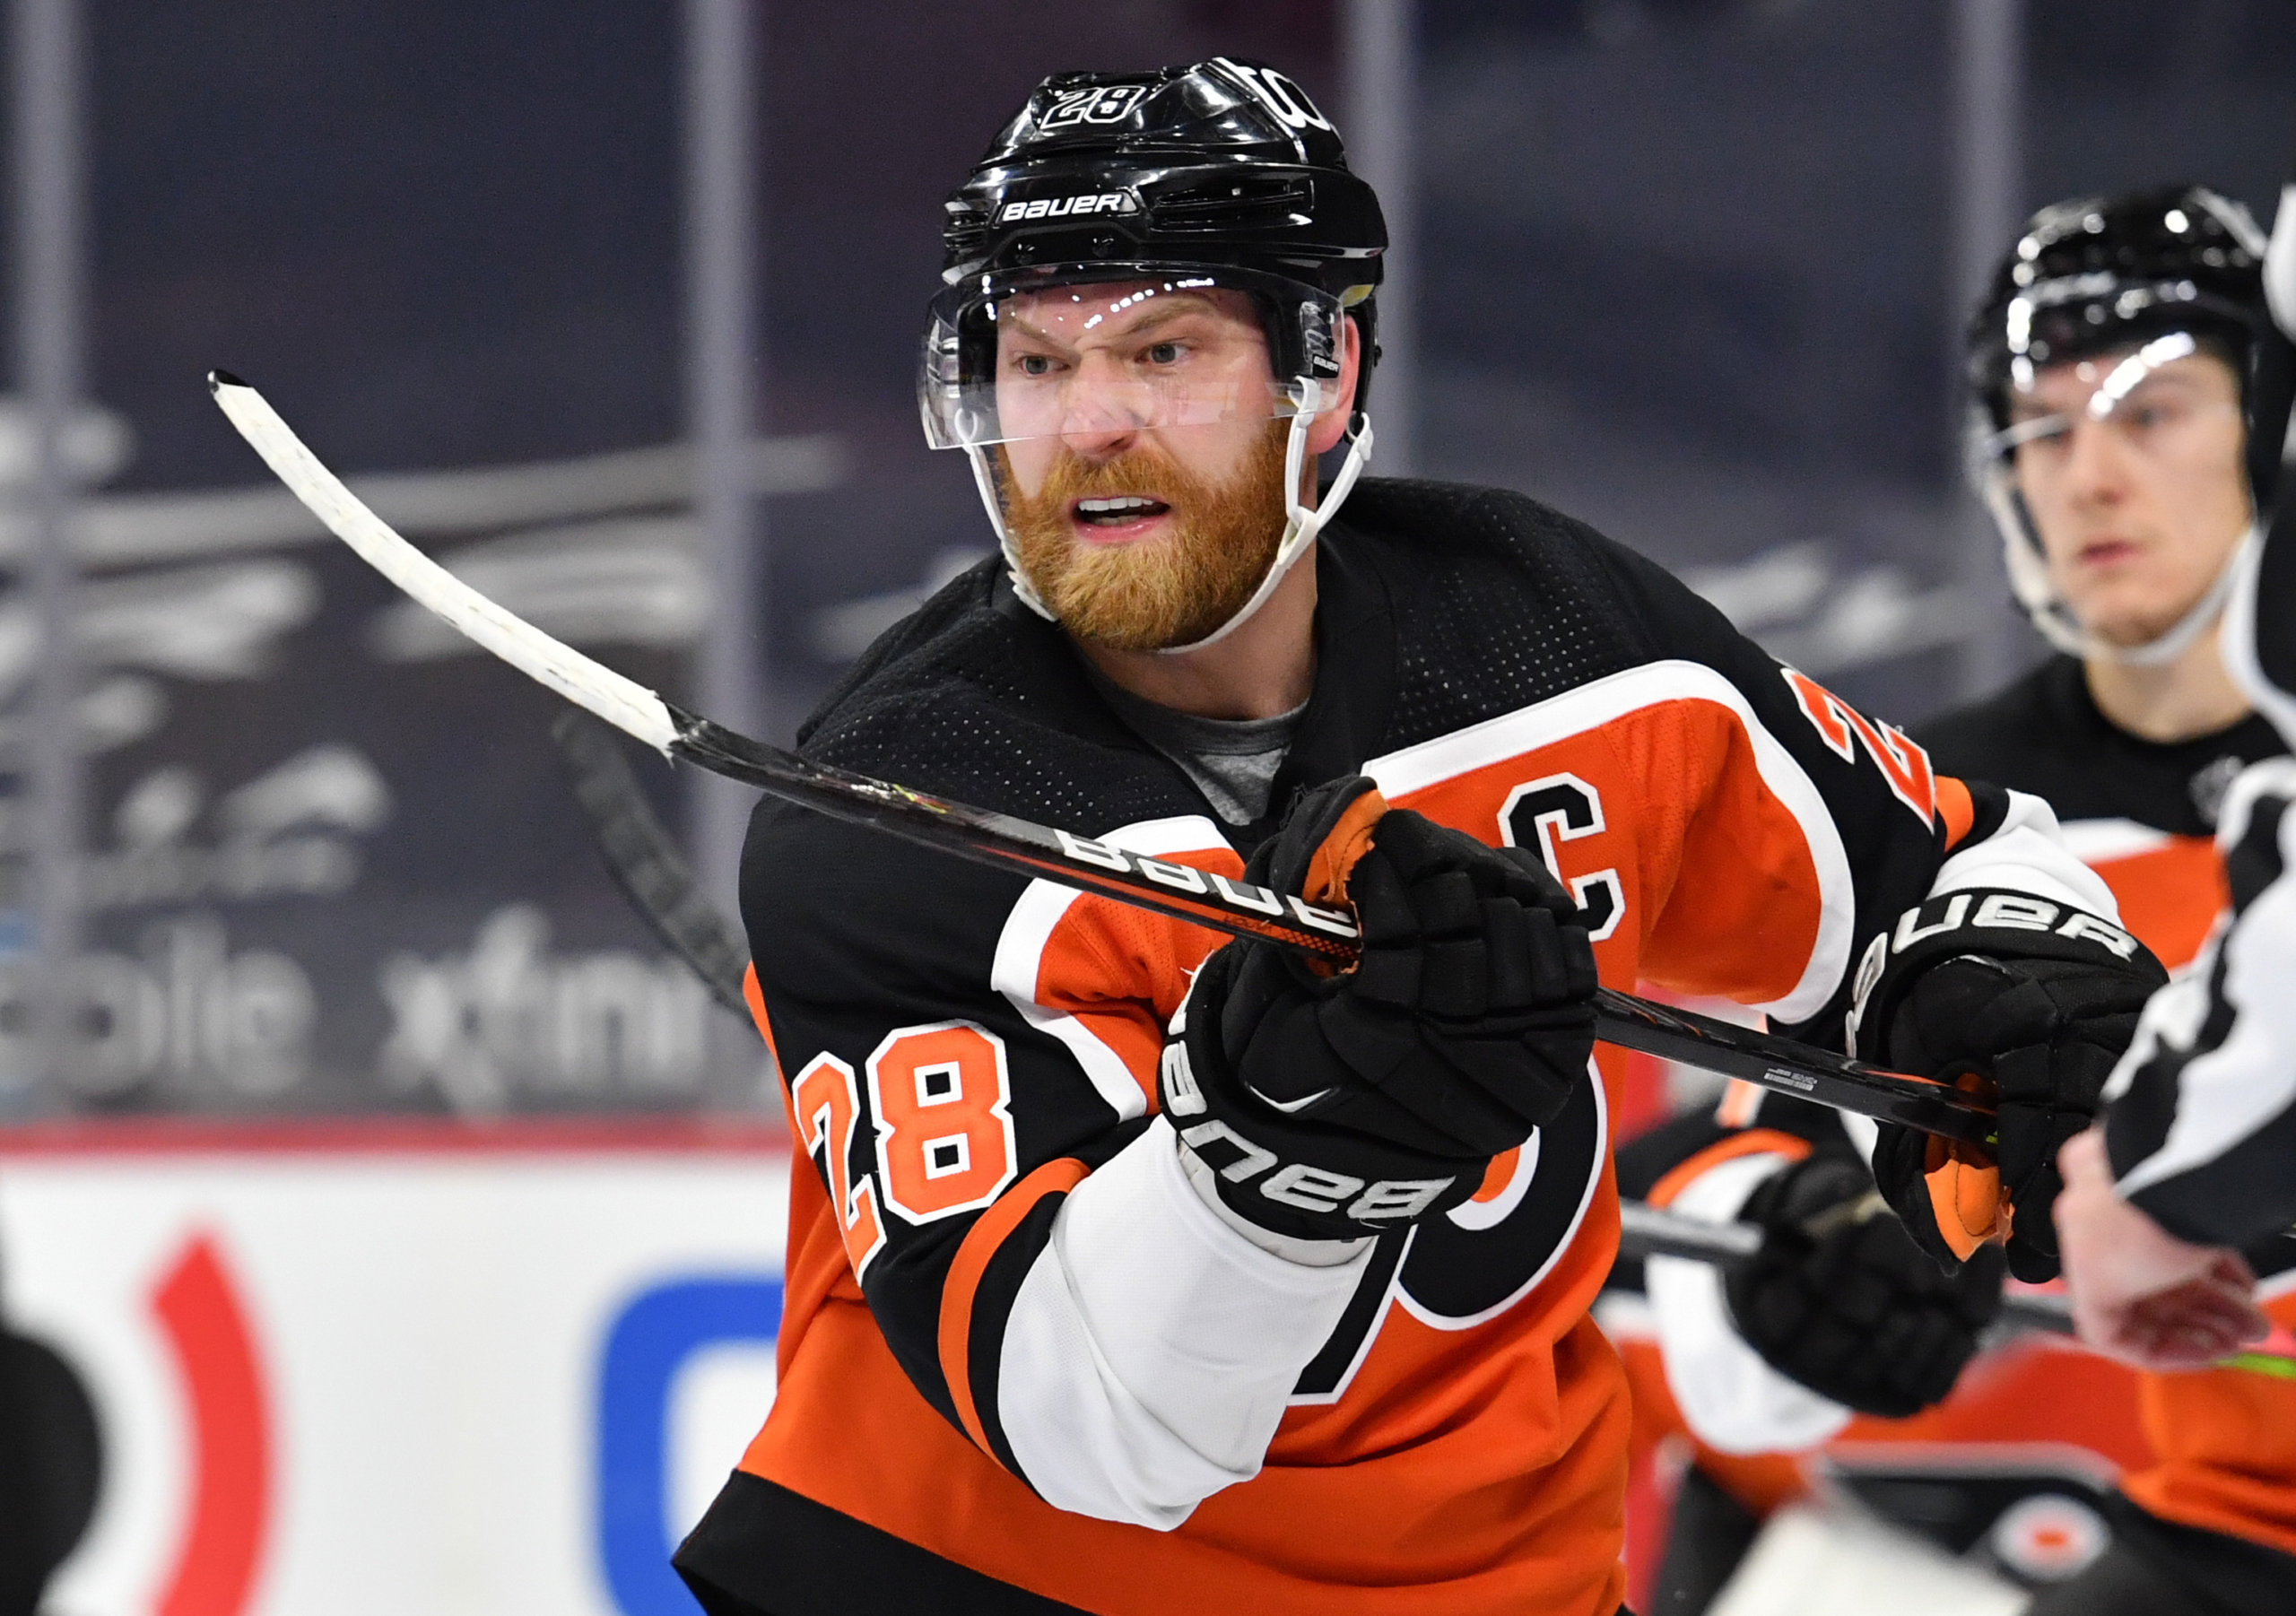 Claude Giroux is on a run, and taking the Flyers with him